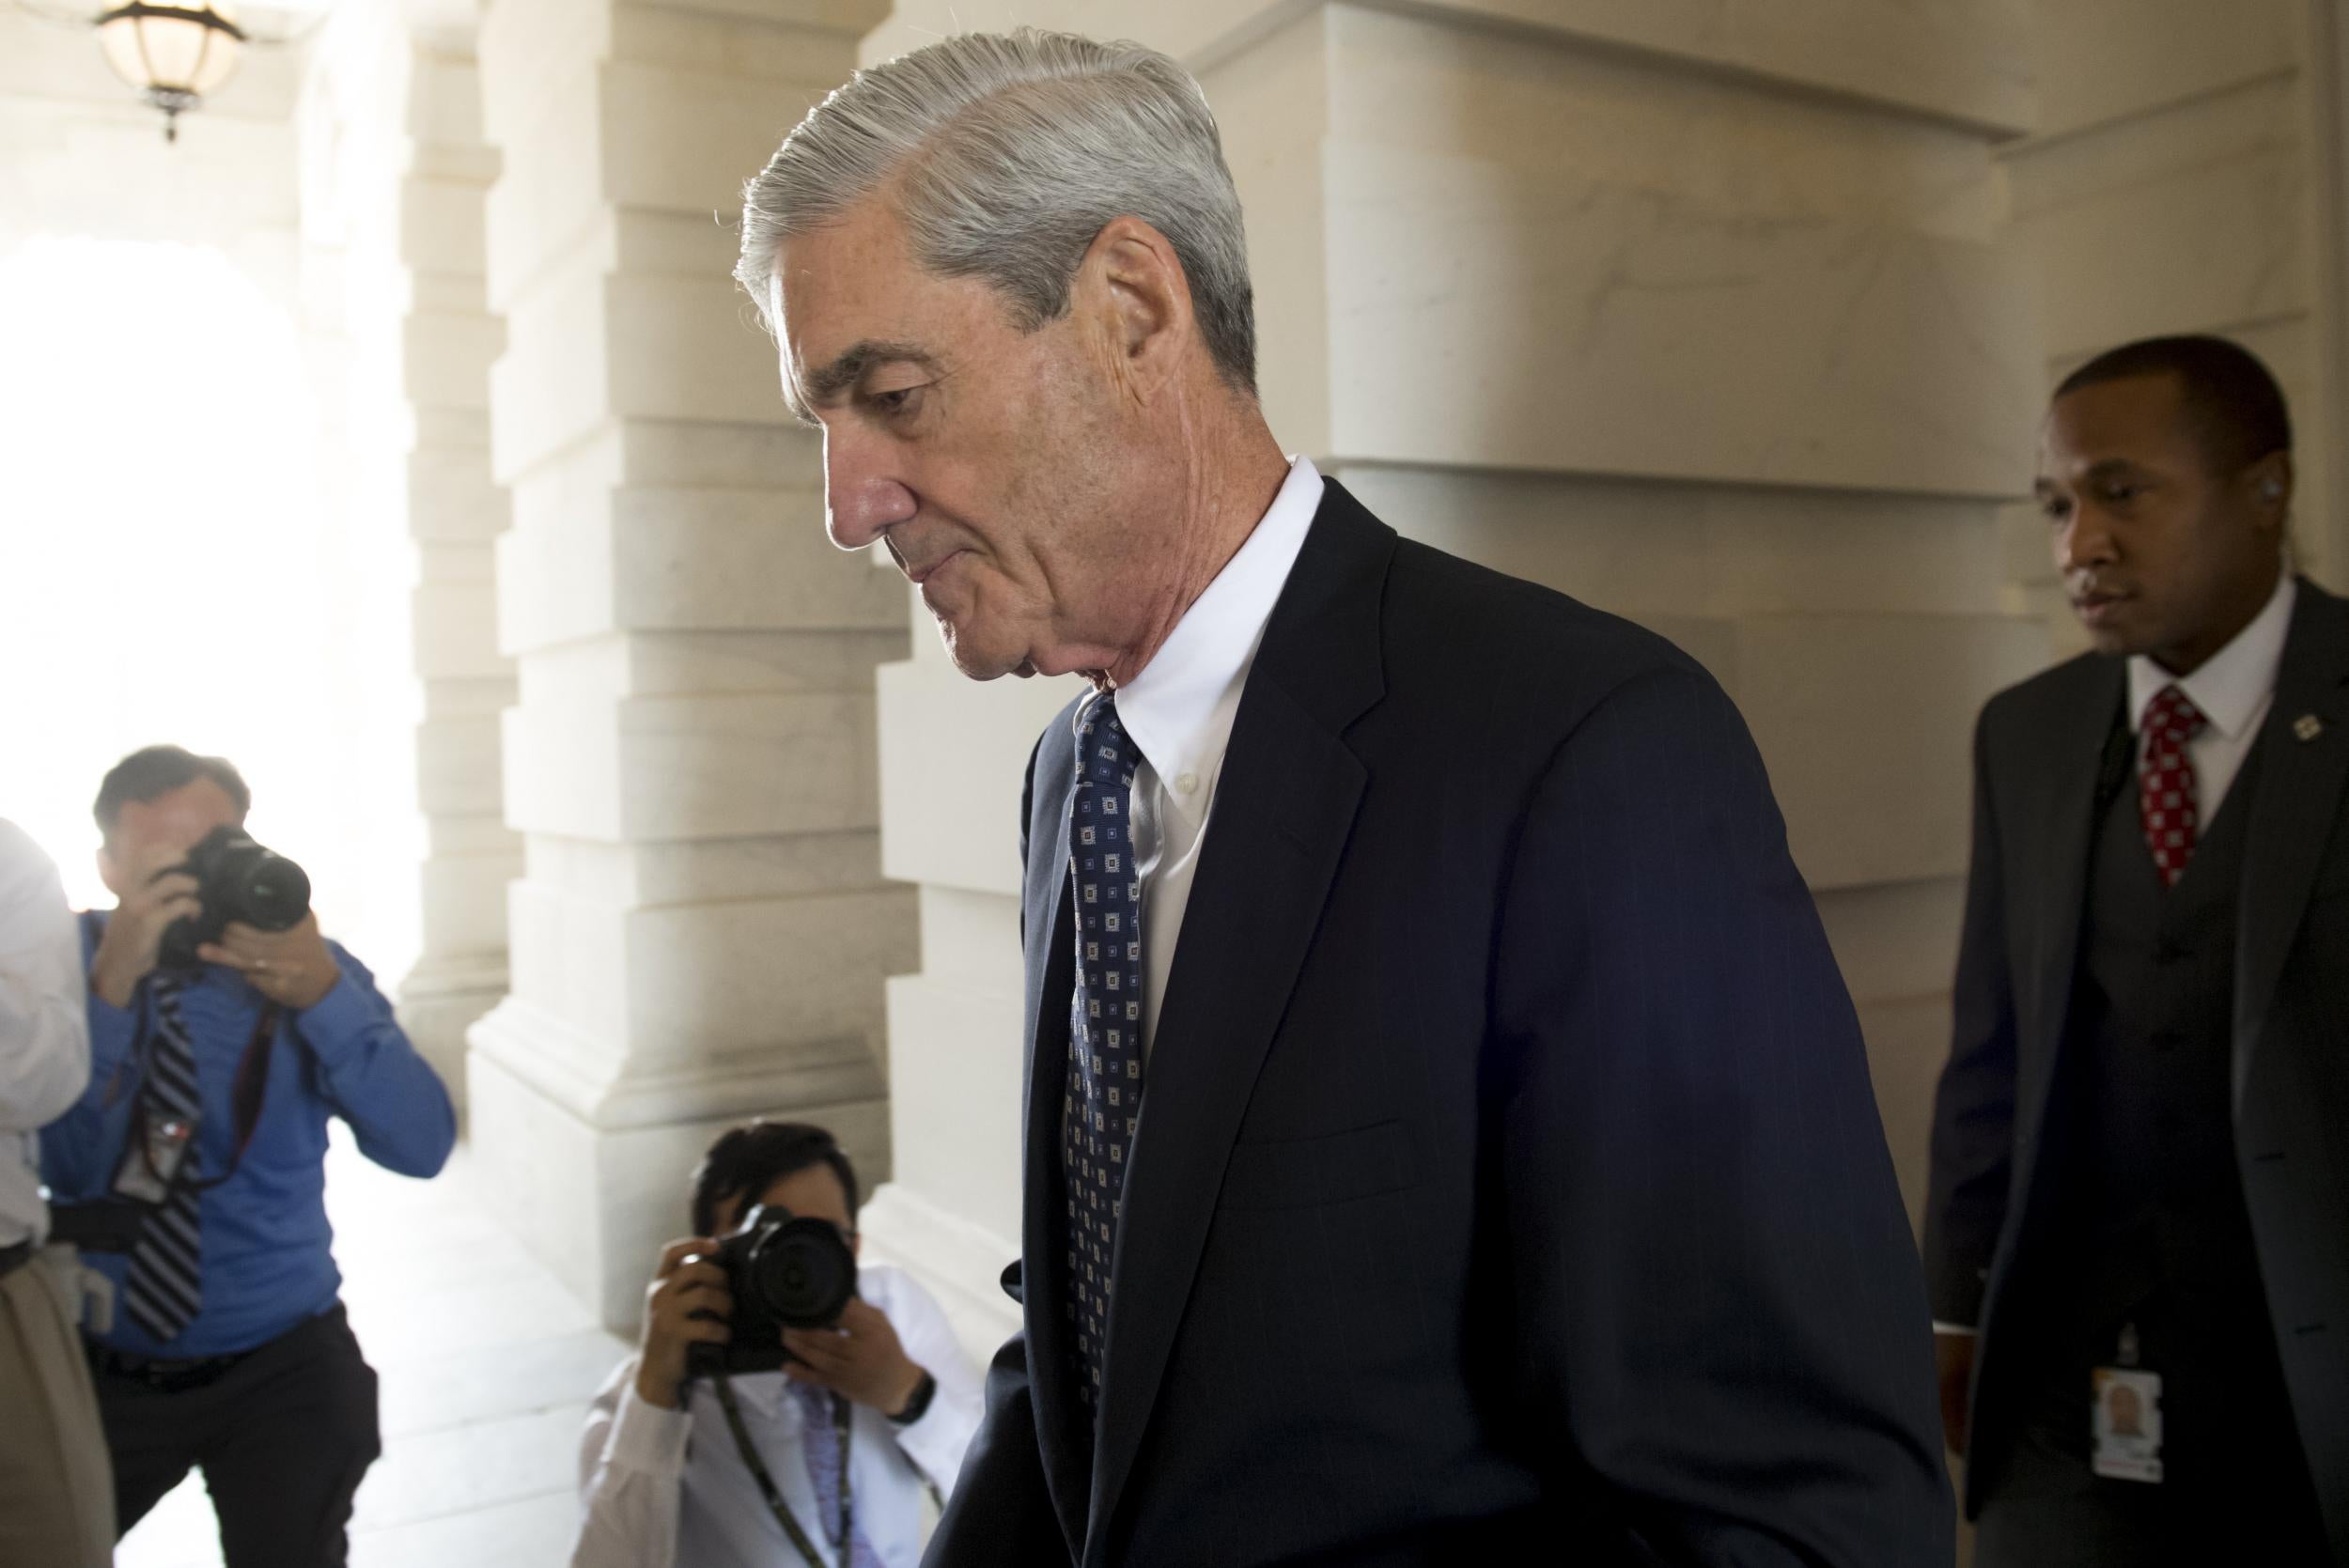 Former FBI Director Robert Mueller, special counsel on the Russia investigation, leaves Capitol Hill following a meeting with members of the US Senate Judiciary Committee